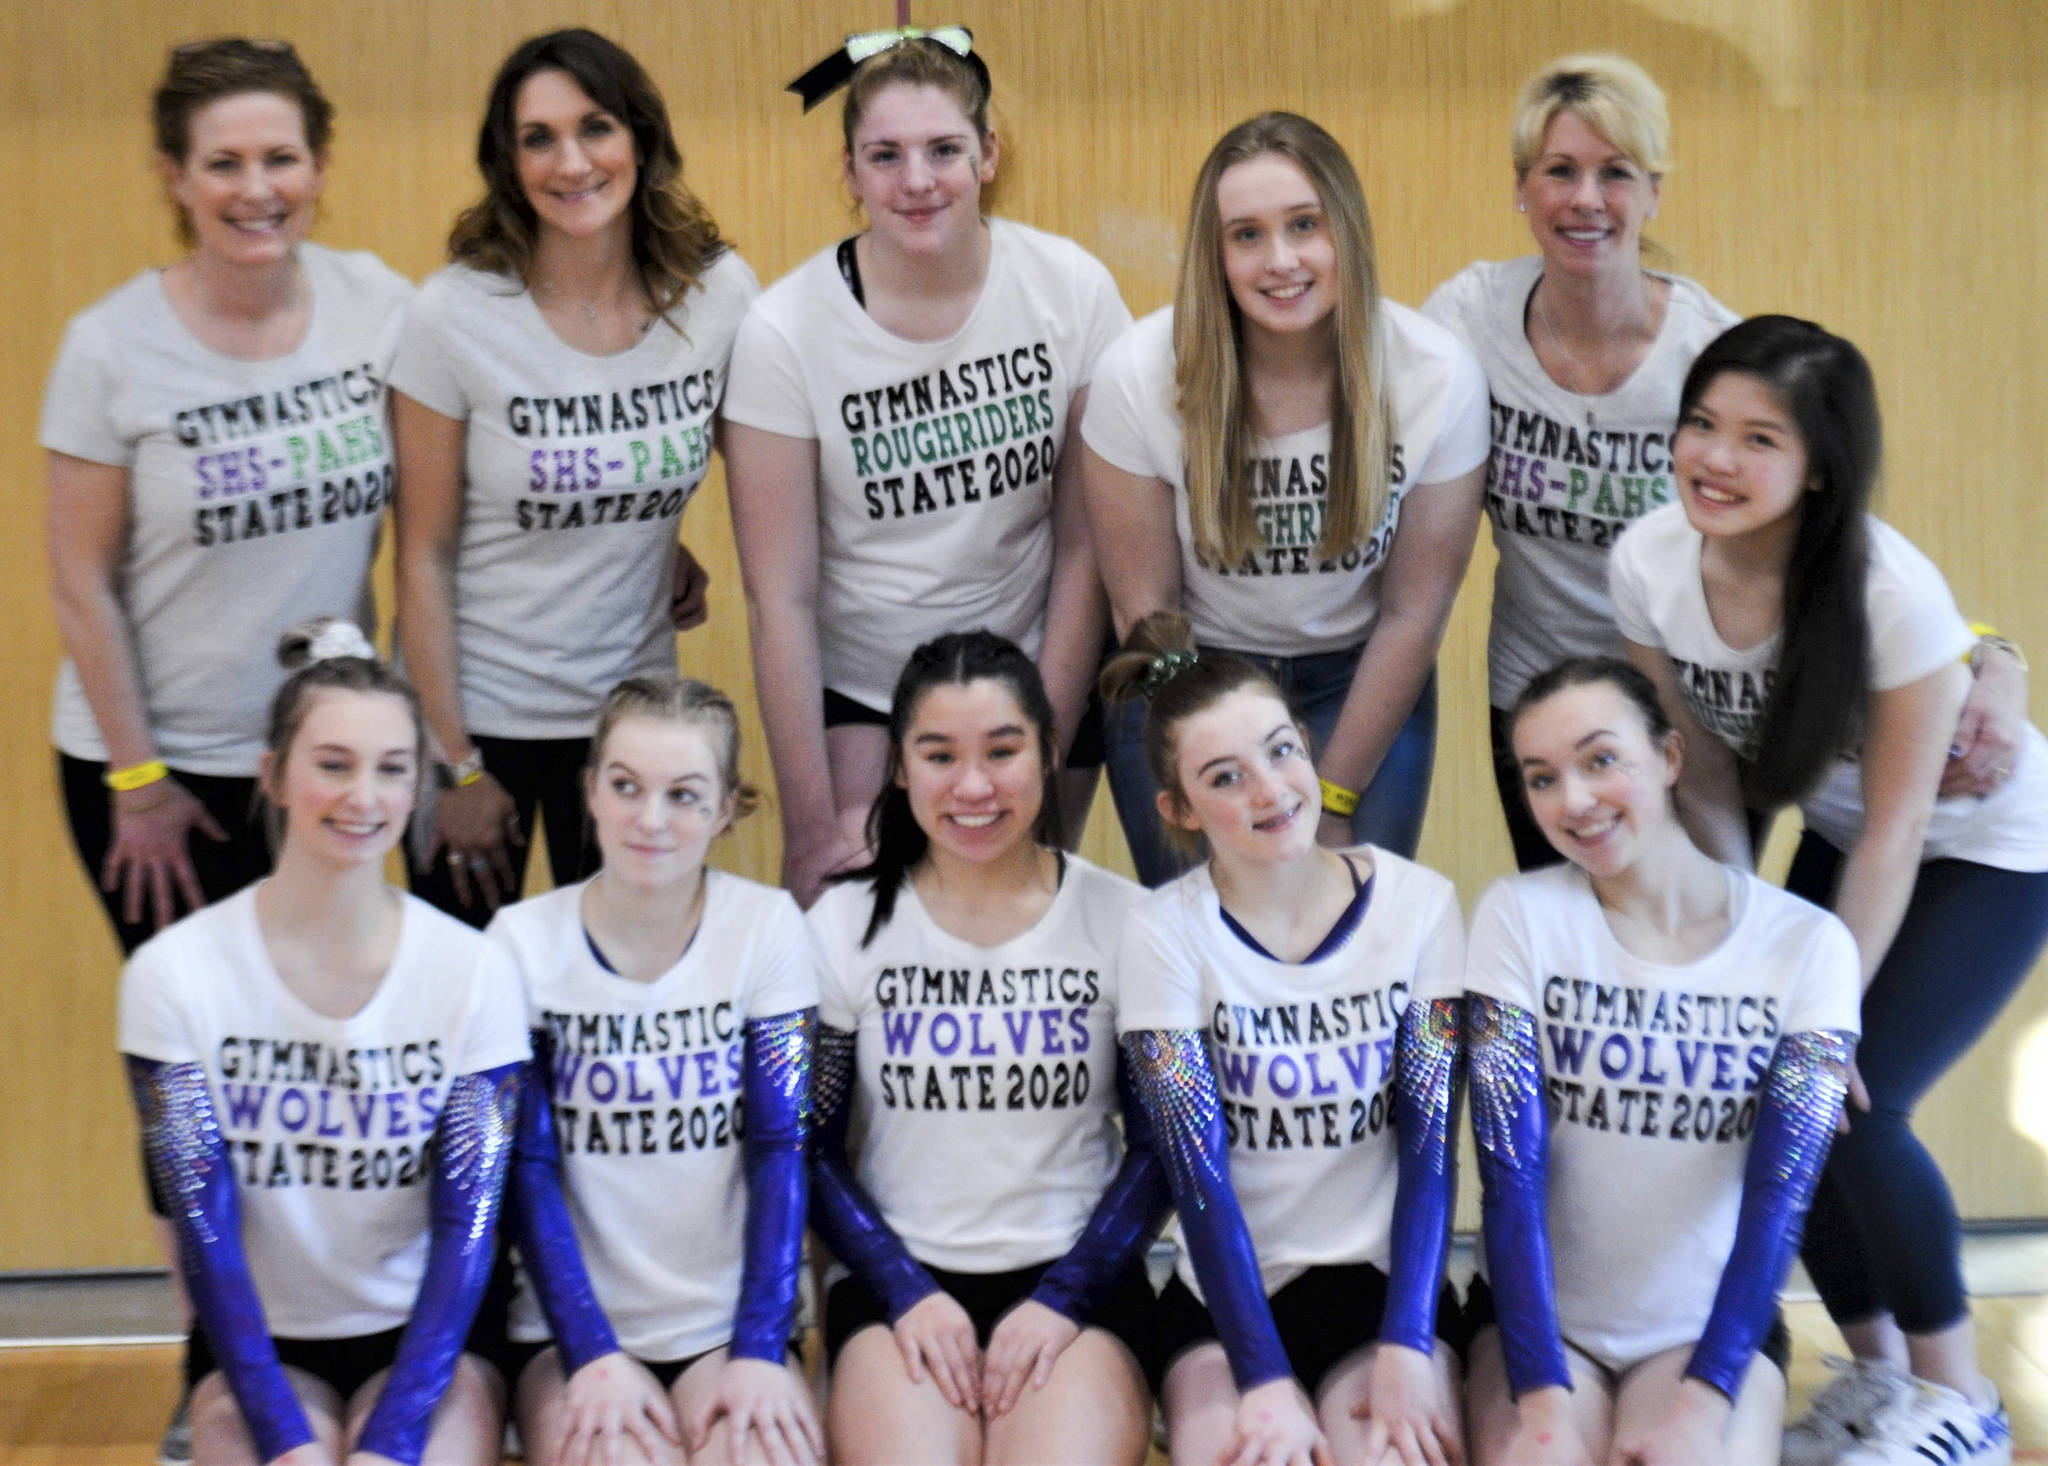 The combined Sequim-Port Angeles team takes a break from competition at the state 1A/2A/3A meet held in bellevue last week. Pictured are (back row, from left) head coach Jackie Mangano, assistant coach Rachel Sharp, Aiesha LaTourette, manager Mazie Tucker, volunteer coach Julie Haguewood and manager Mei Ying Harper-Smith, with (from left) Sequim’s Emma Sharp, Kori Miller, Lesae Pfeffer, Danica Pierson and Gracie Sharp. Submitted photo